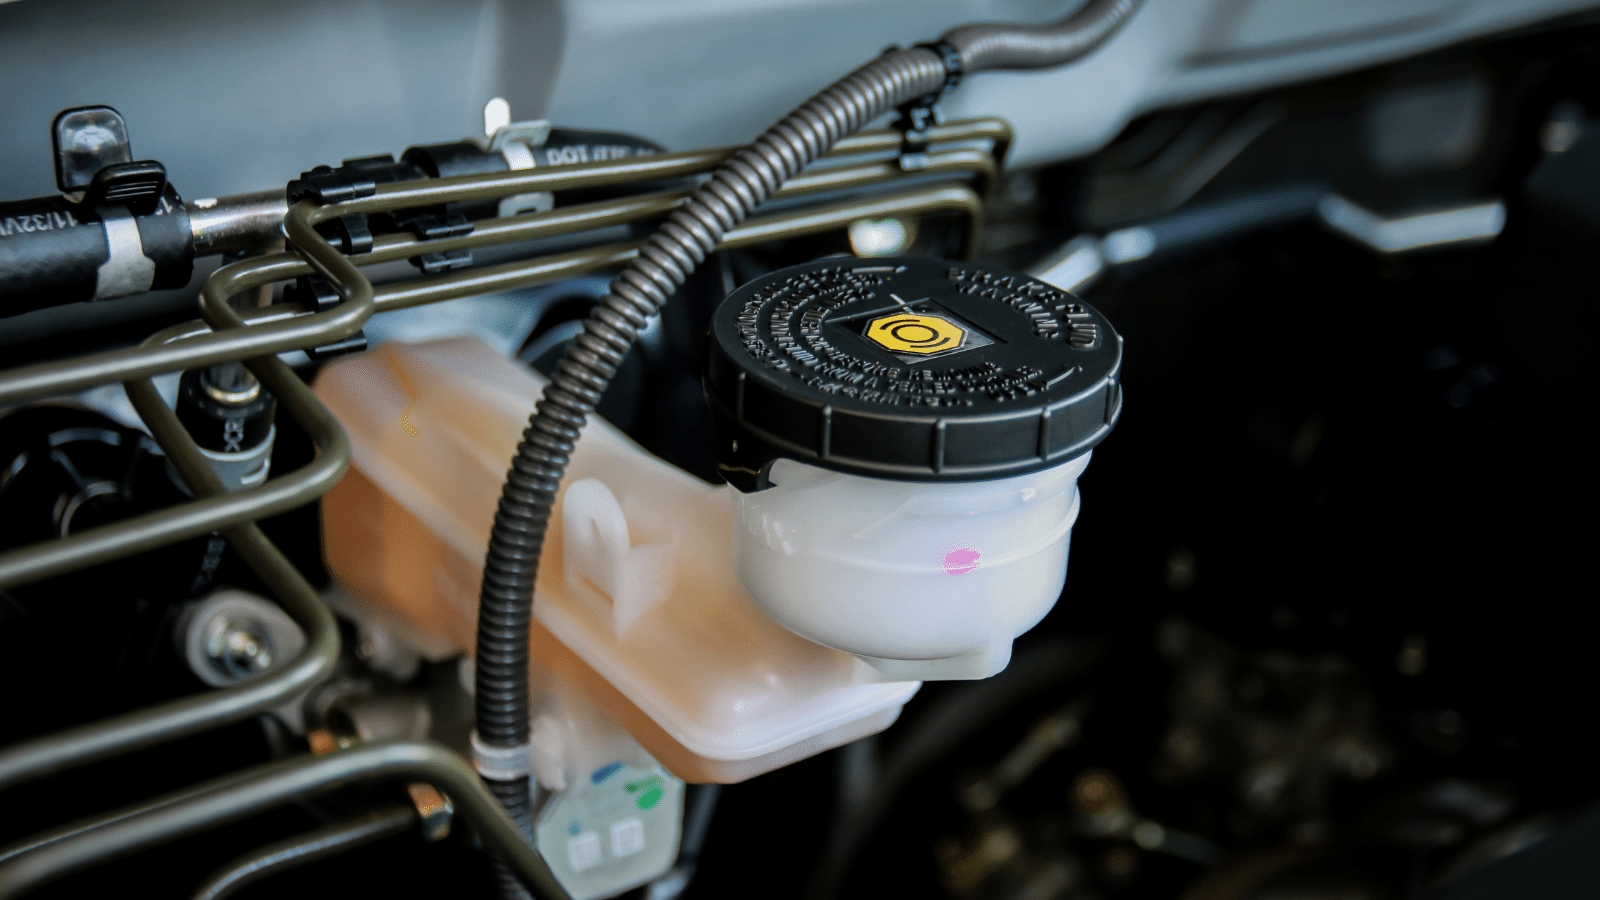 Brake Fluid for the Toyota RAV4: Here’s What You Should Know